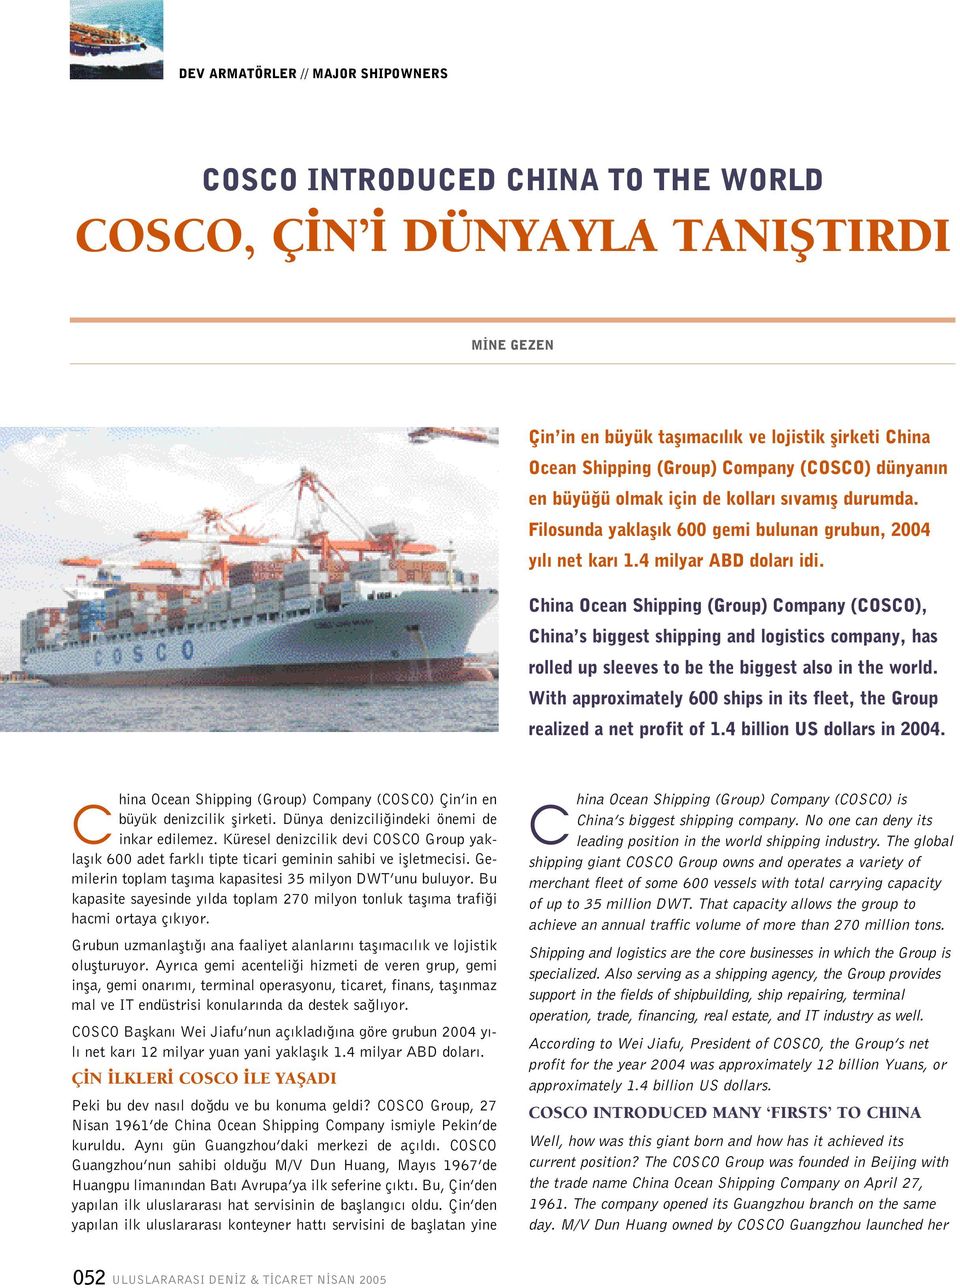 China Ocean Shipping (Group) Company (COSCO), China s biggest shipping and logistics company, has rolled up sleeves to be the biggest also in the world.